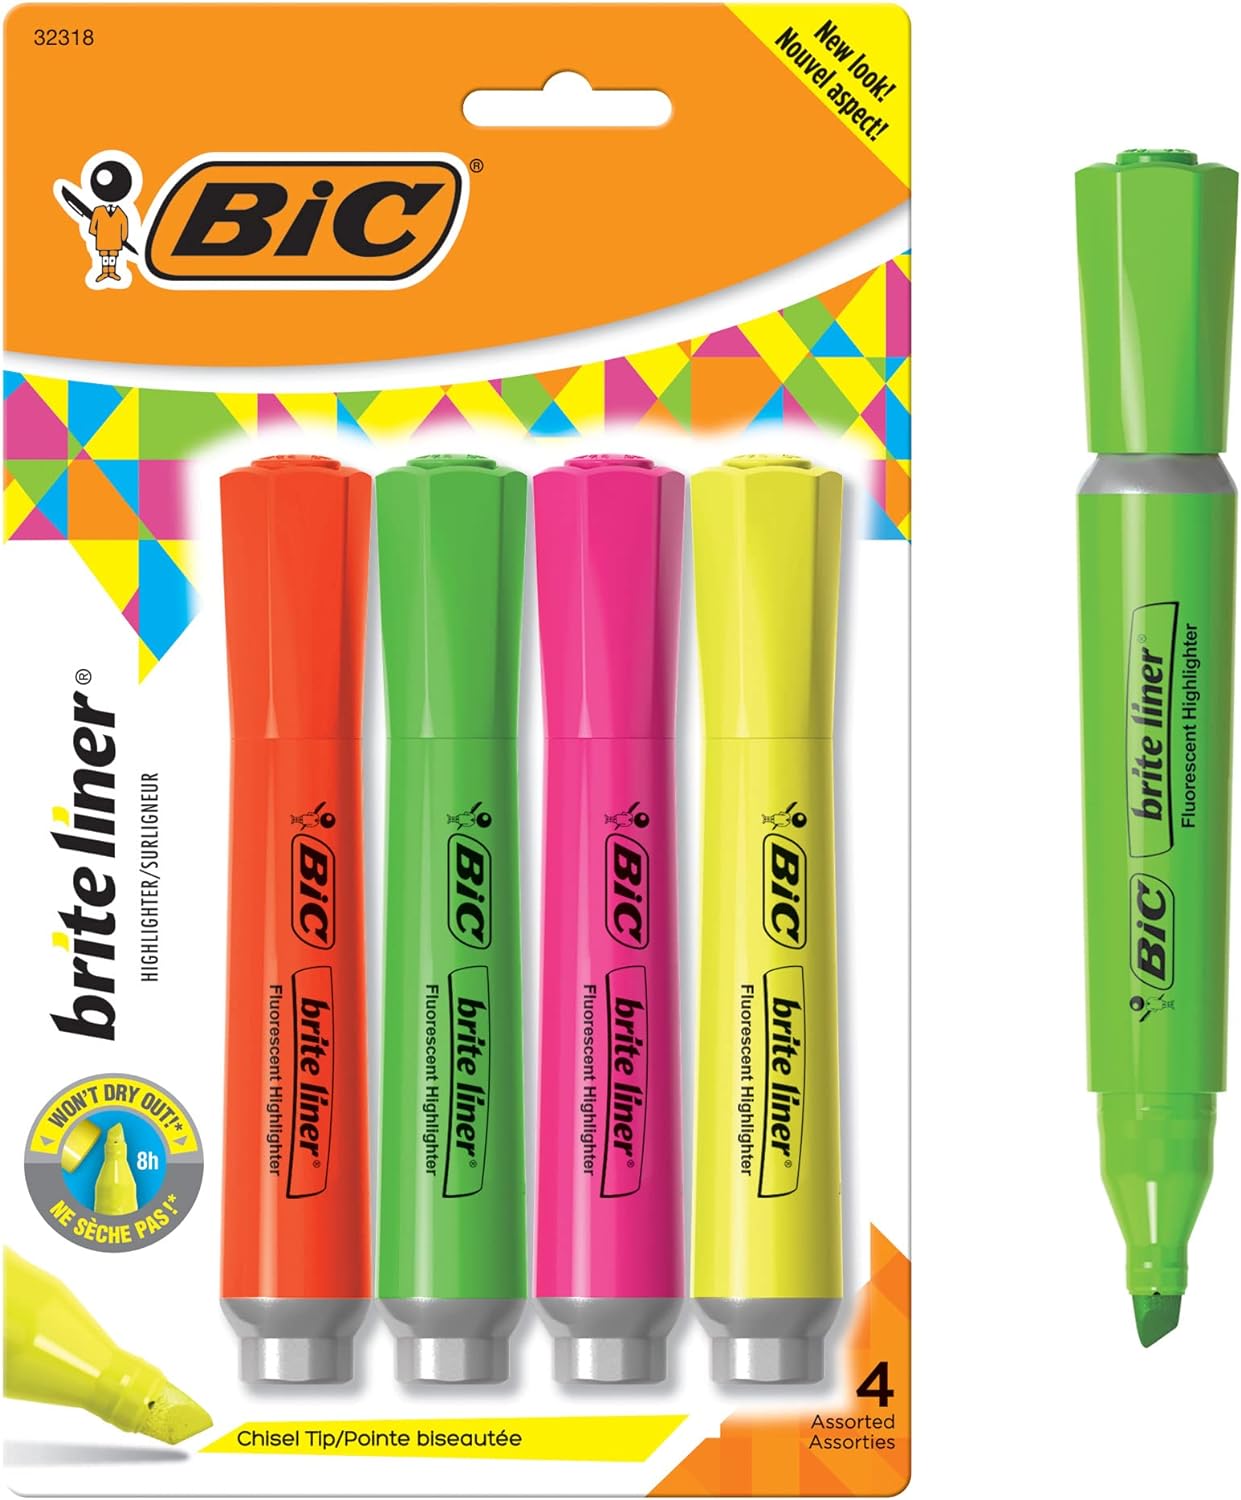 BIC Brite Liner Highlighter with Rubber Grip, Chisel Tip, Assorted, Pack of 4 - BLMGP41-A-AST